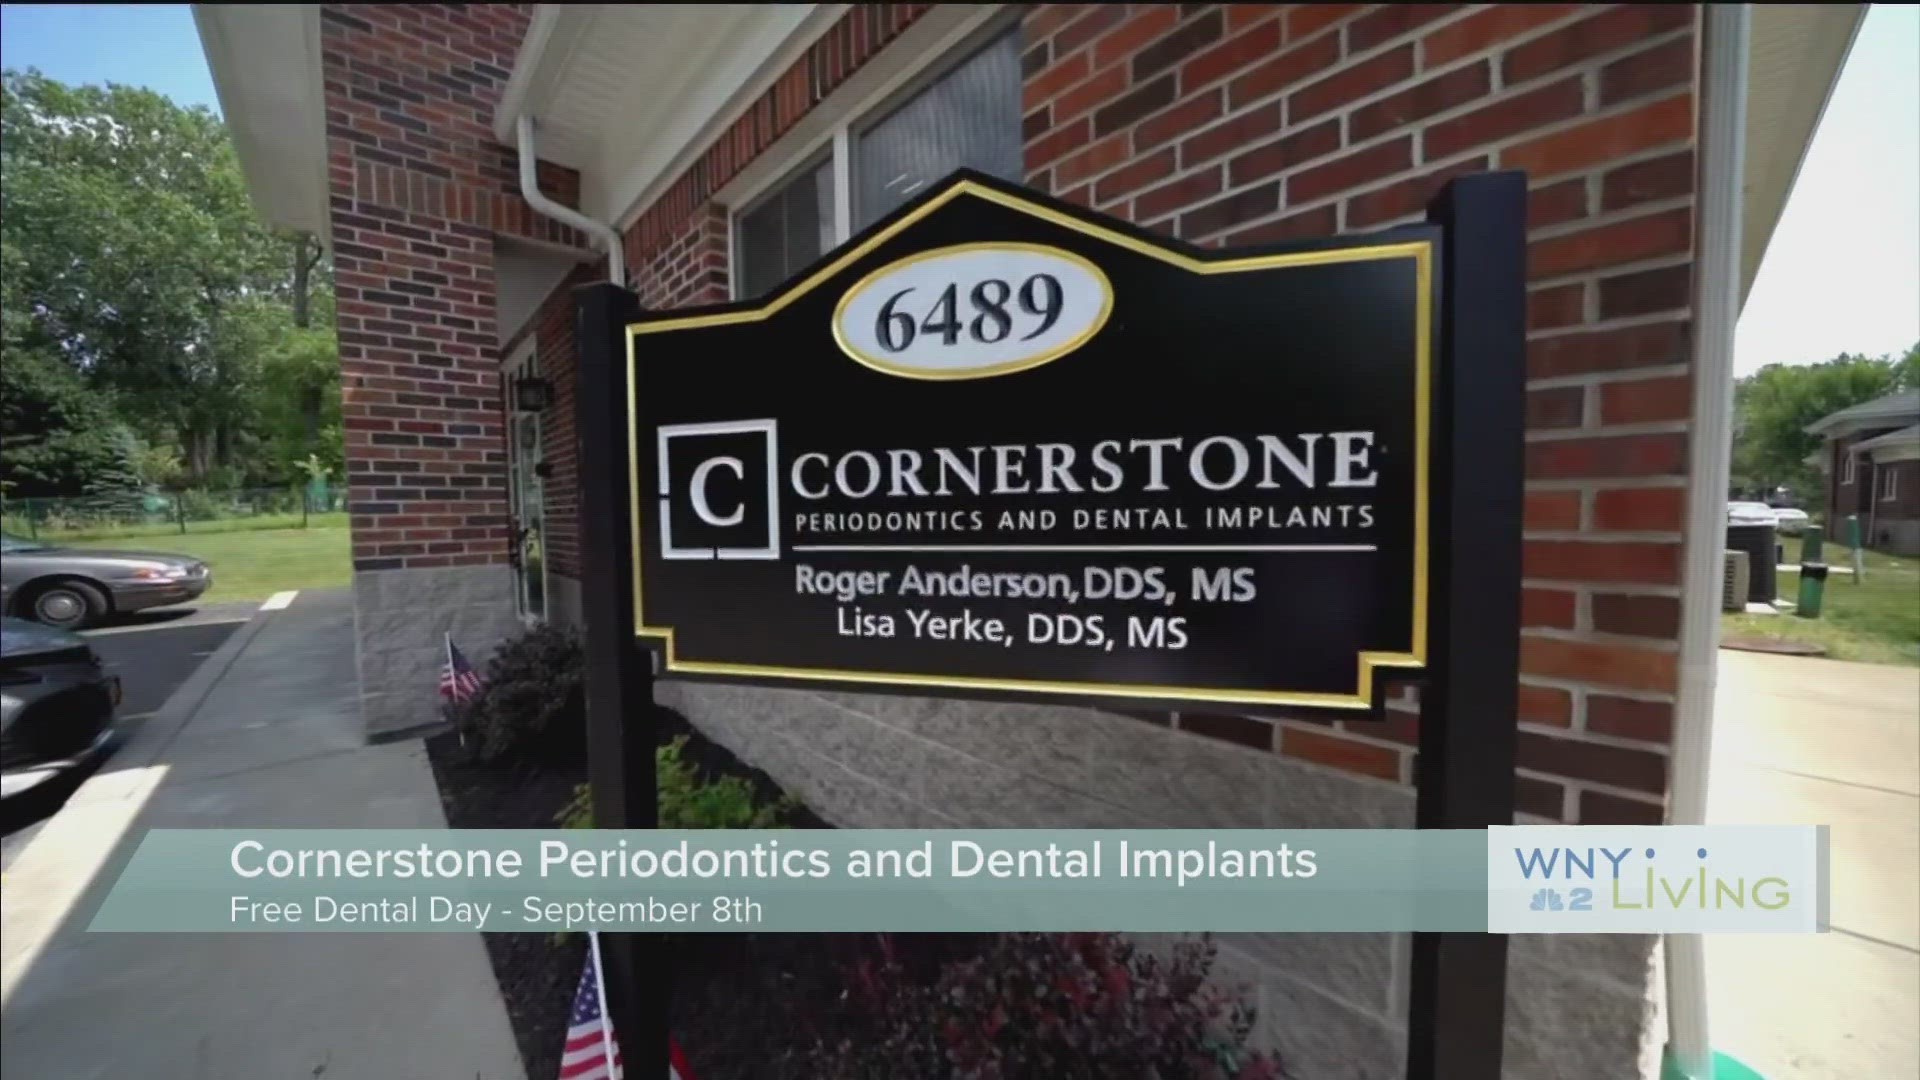 WNY Living - April 22 - Cornerstone Periodontics and Dental Implants (THIS VIDEO IS SPONSORED BY CORNERSTONE PERIODONTICS AND DENTAL IMPLANTS)